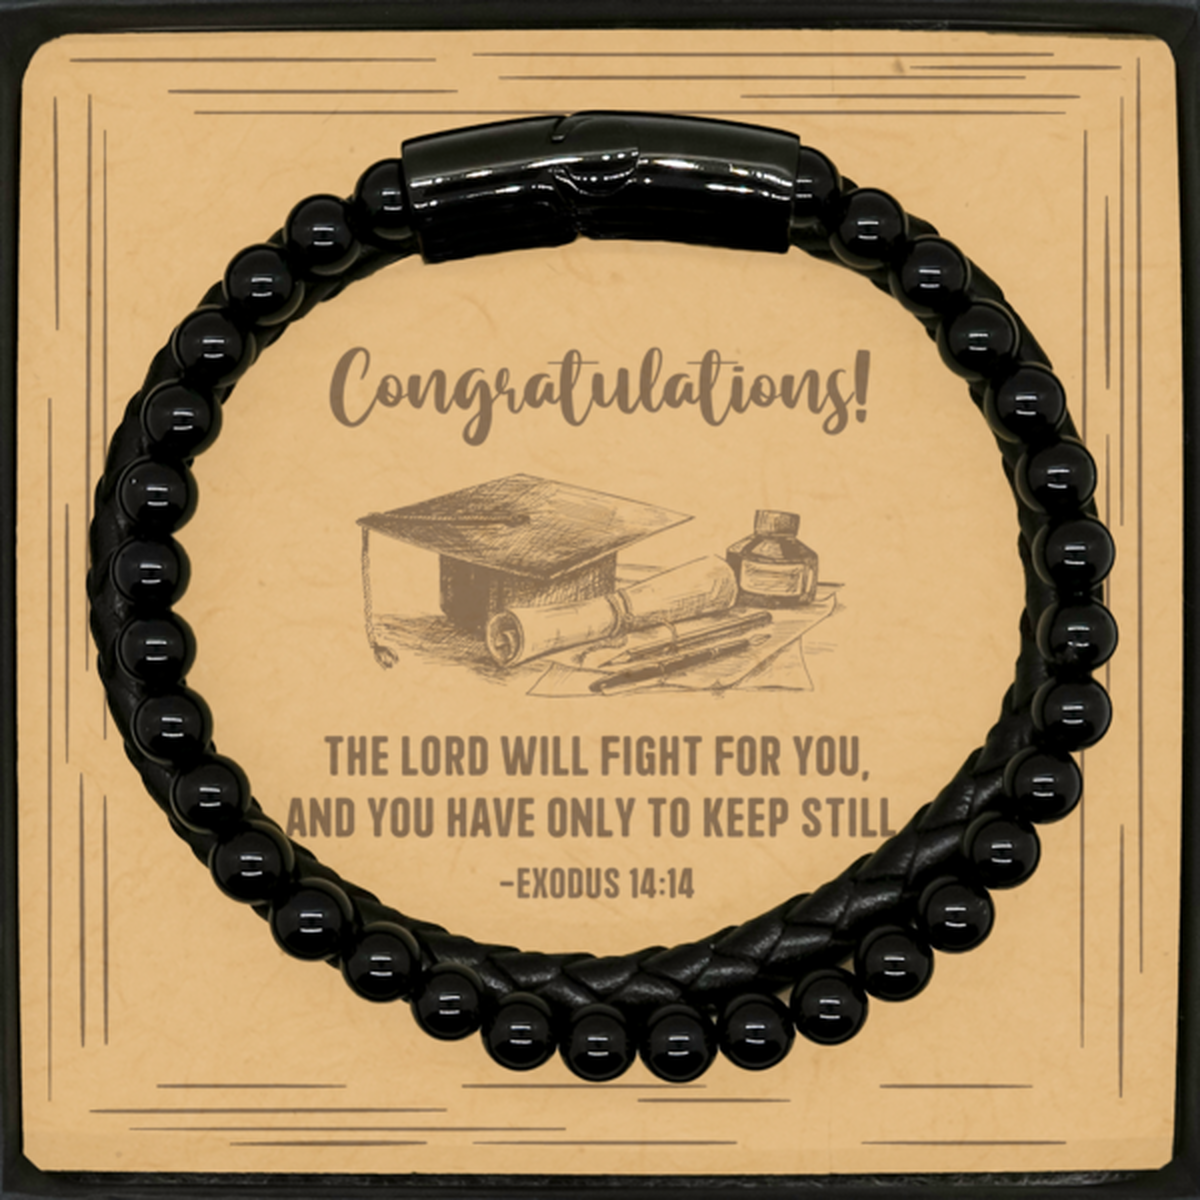 Religious Graduation Cards, The Lord will fight for you, Bible Verse Stone Leather Bracelet, Christian Graduation Gifts